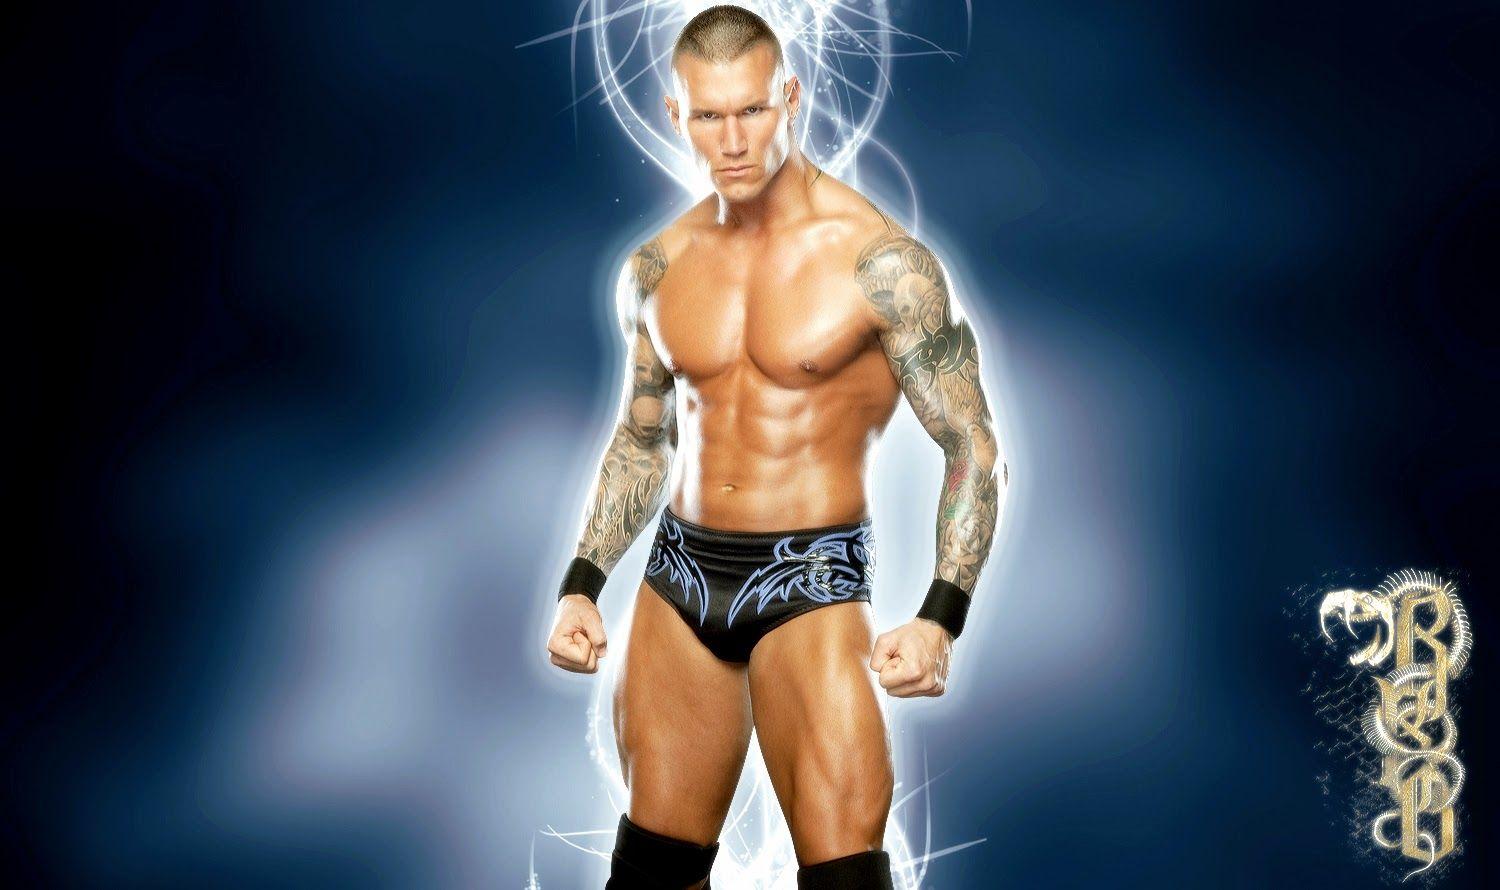 image For > Randy Orton In Suit Wallpaper